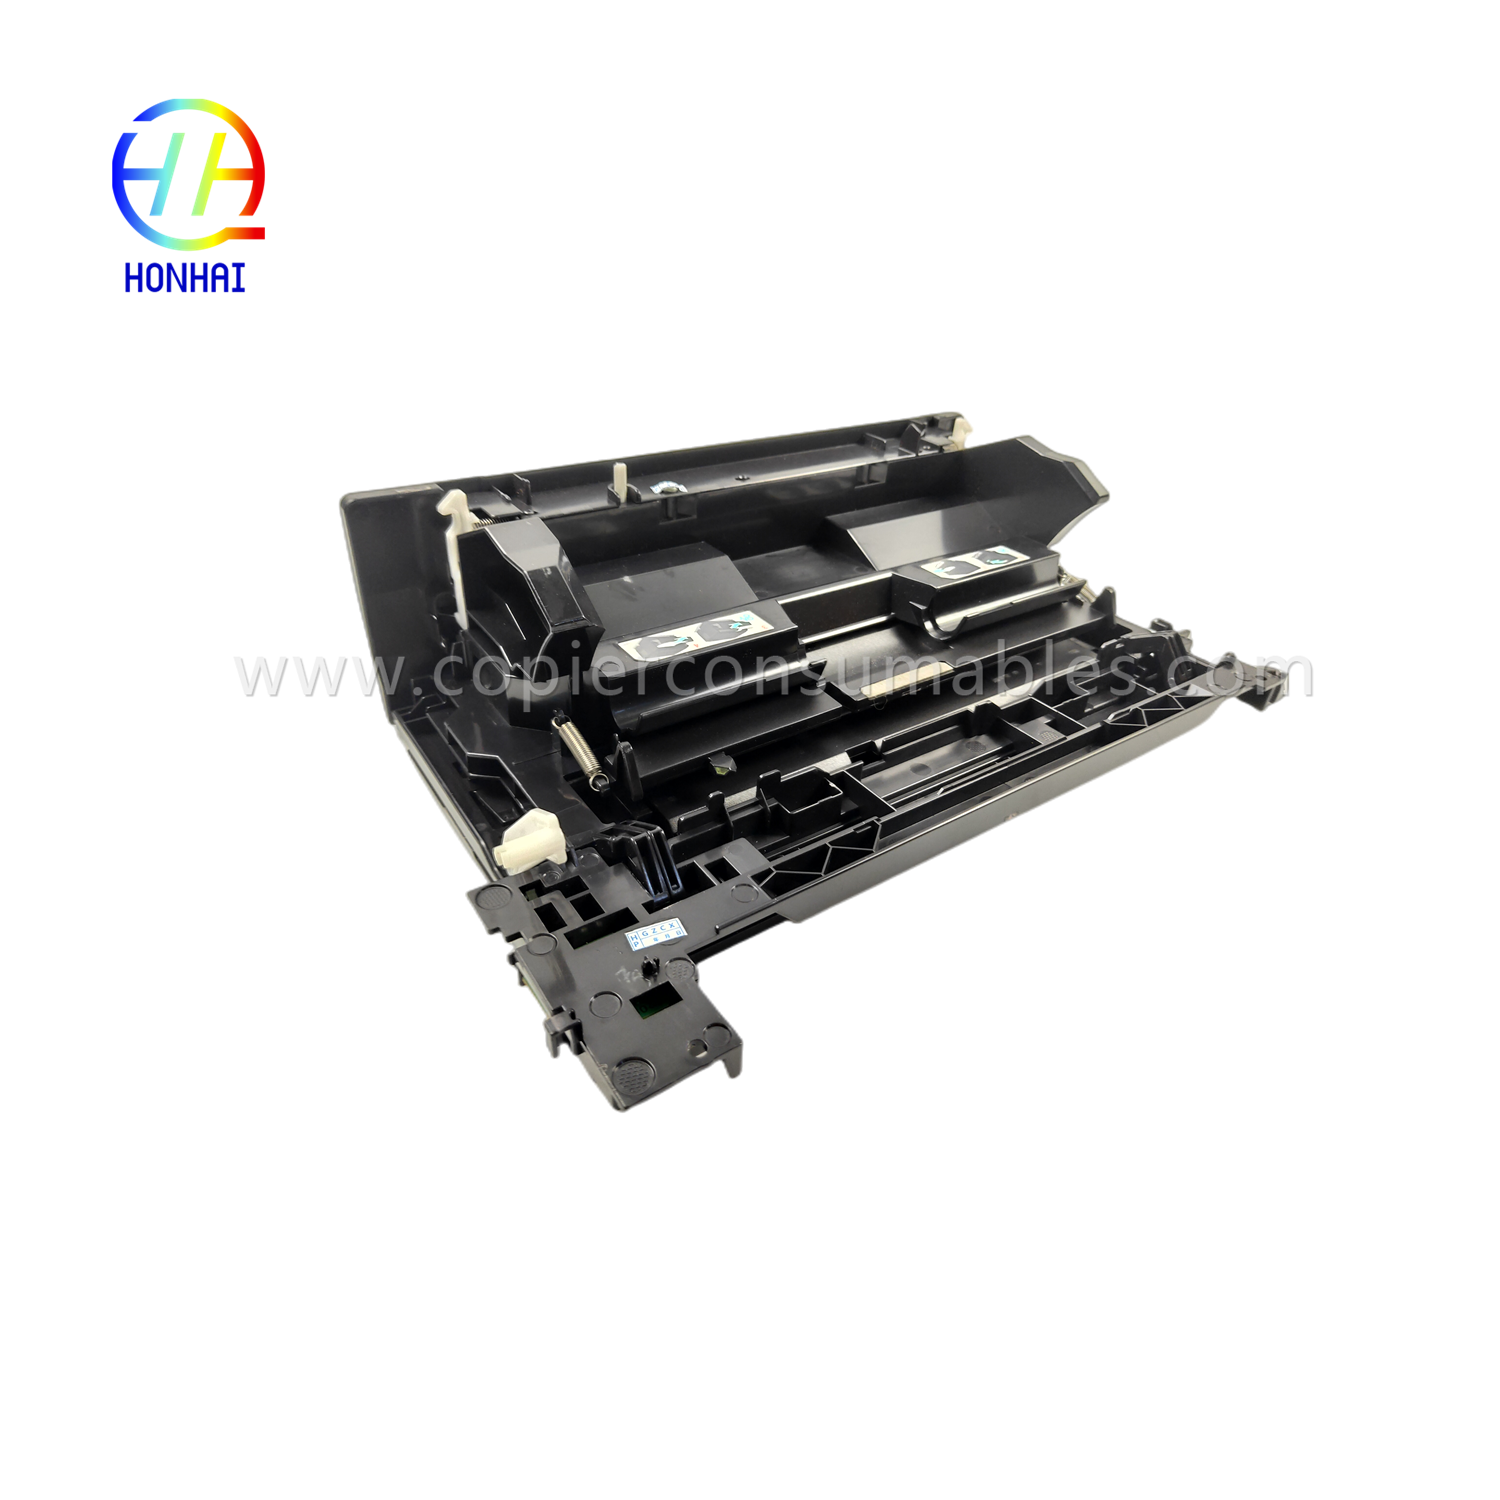 https://c585.goodao.net/puerta-frontal-para-hp-pro400-m401-hp401dne-401d-first-tray-manual-feeder-front-cover-product/